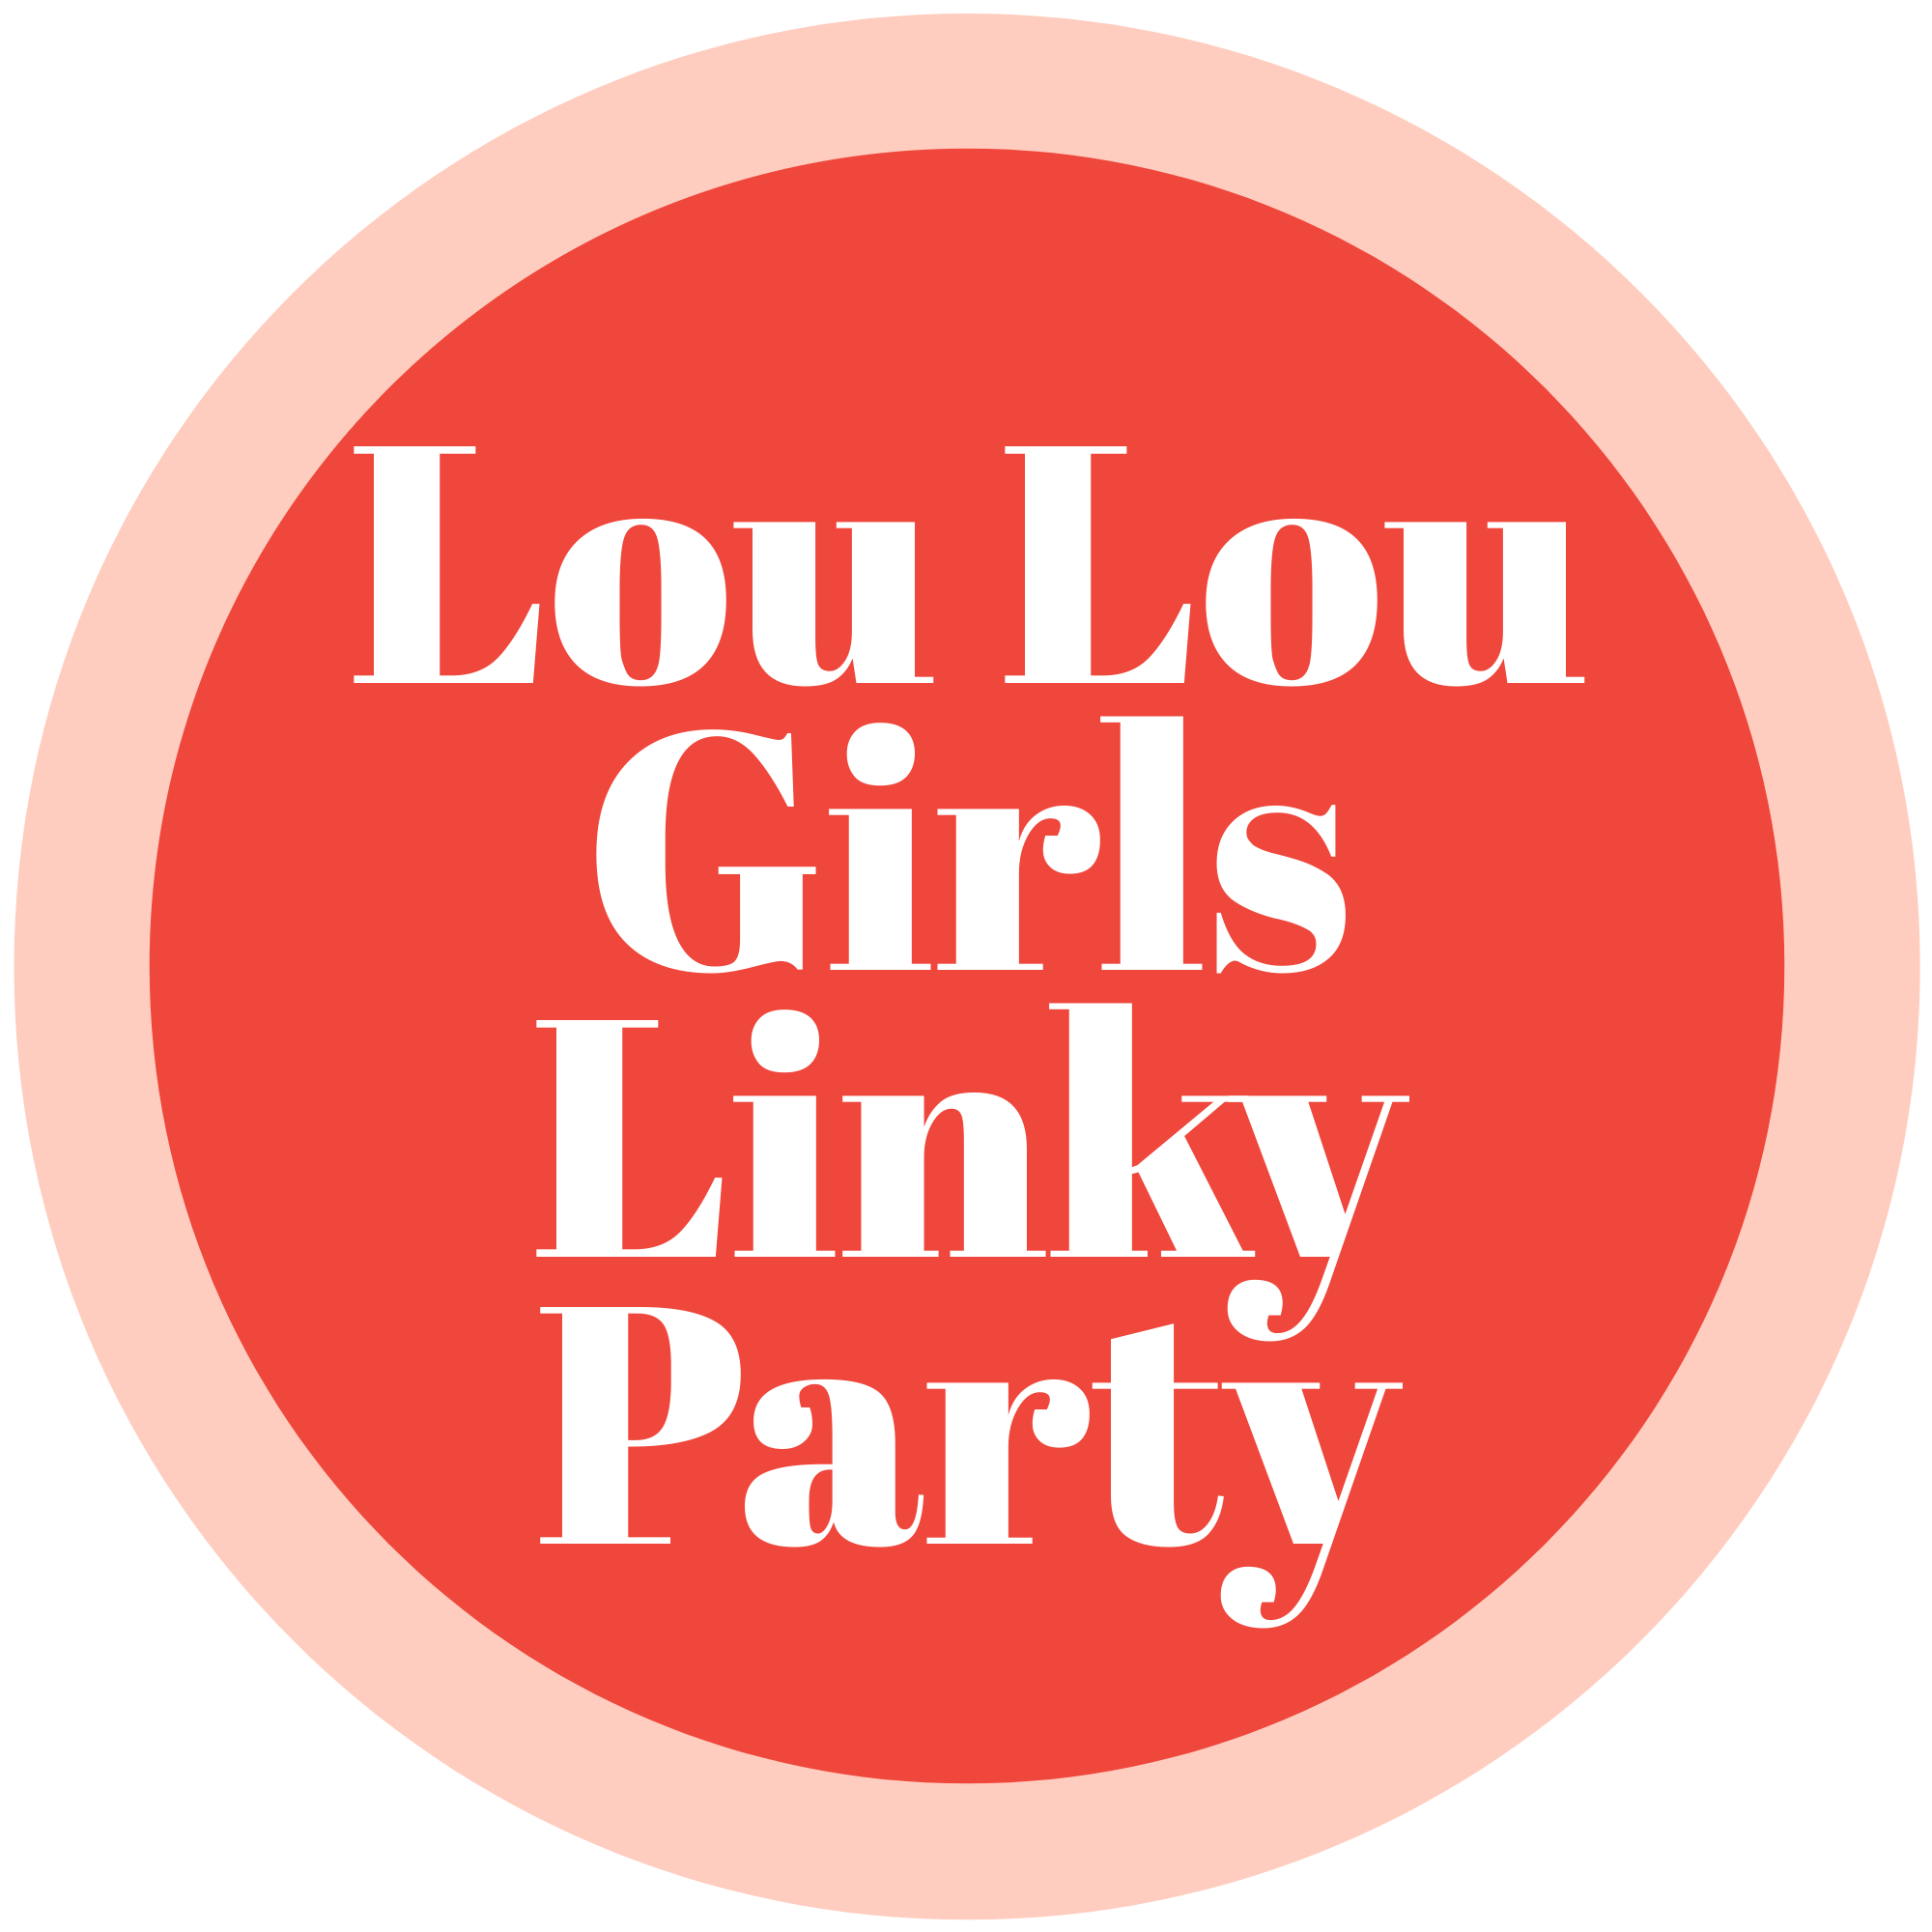 Lou Lou Girls Fabulous Party 475 #linkyparty #bloghop #linkyparties